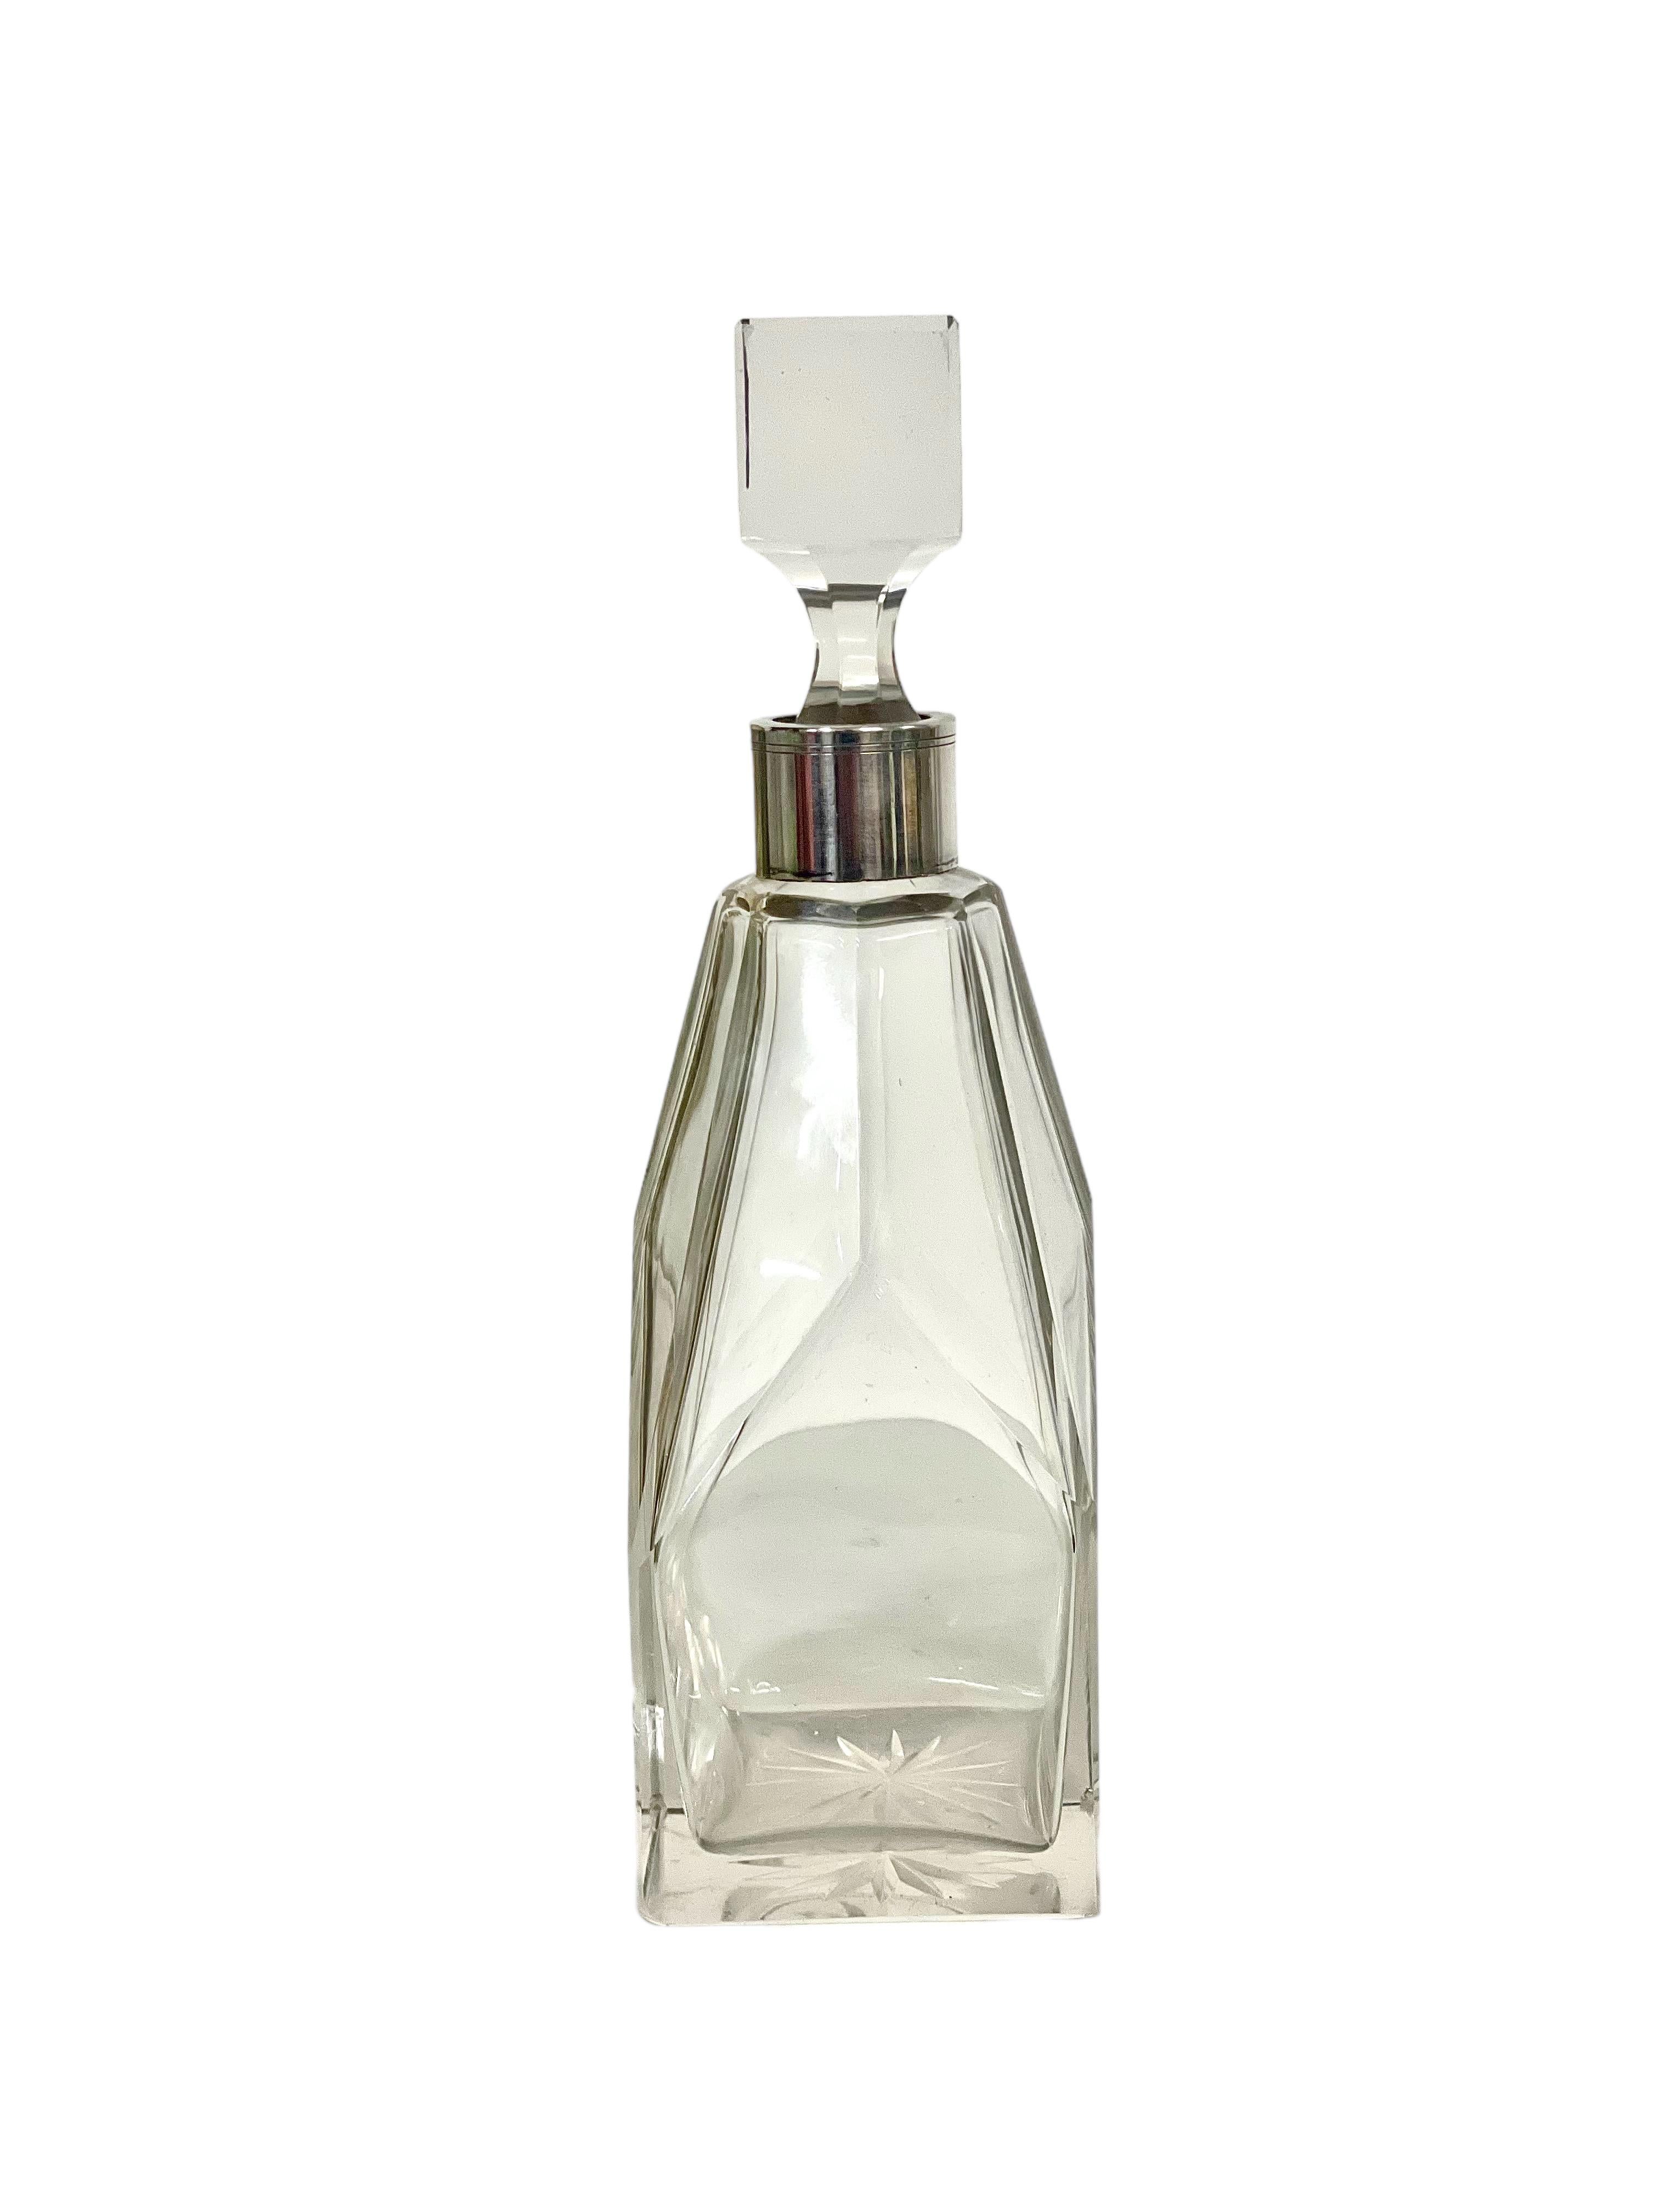 An impressive cut crystal lidded decanter with silver-plated collar made by renowned crystal manufacturer Baccarat. This stylish piece of barware has been meticulously crafted from fine crystal, and features four faceted sides that brilliantly